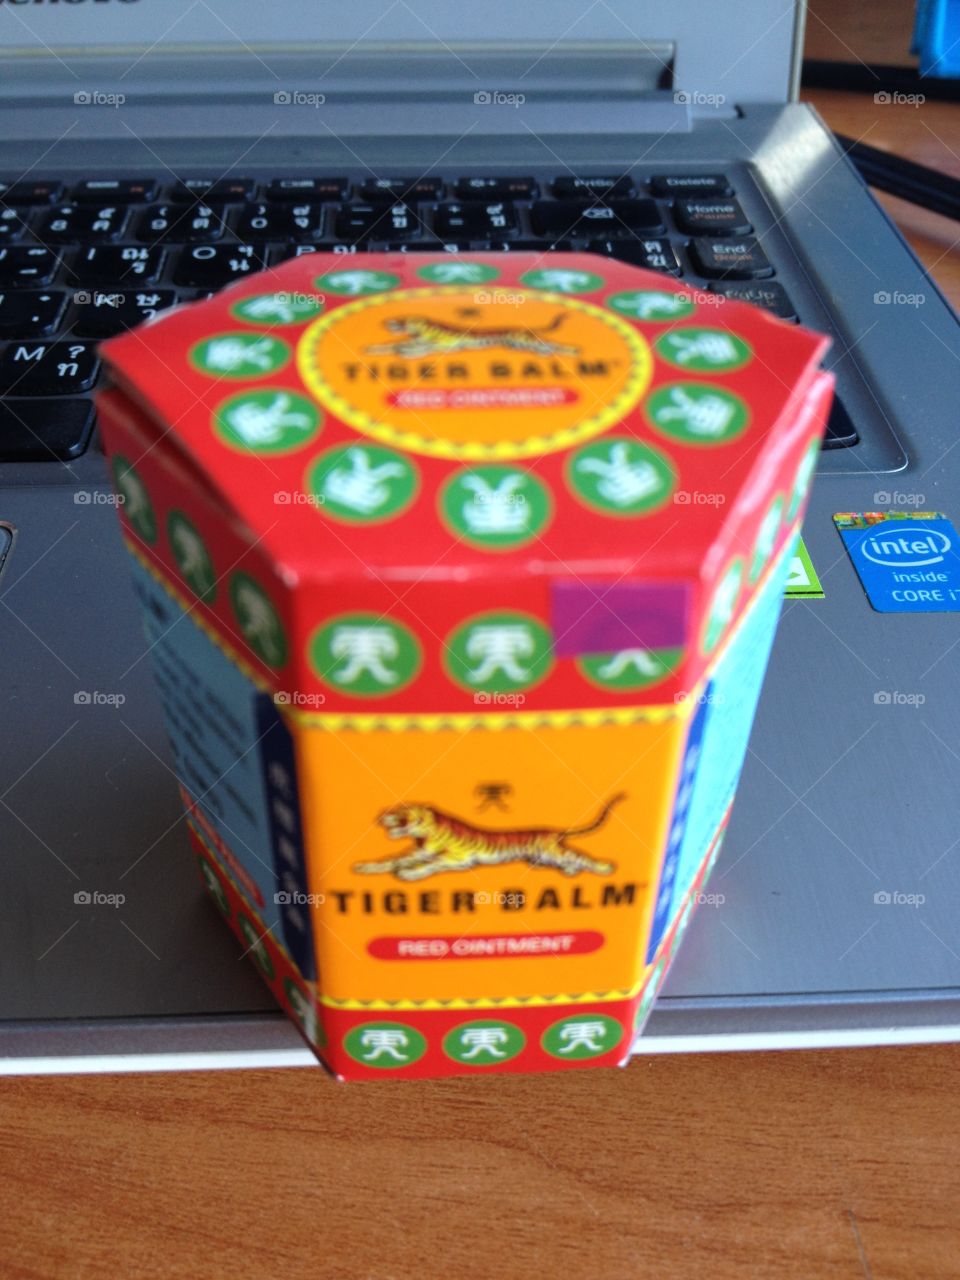 Tiger balm the most famous balm made in Thailand reduce pain   